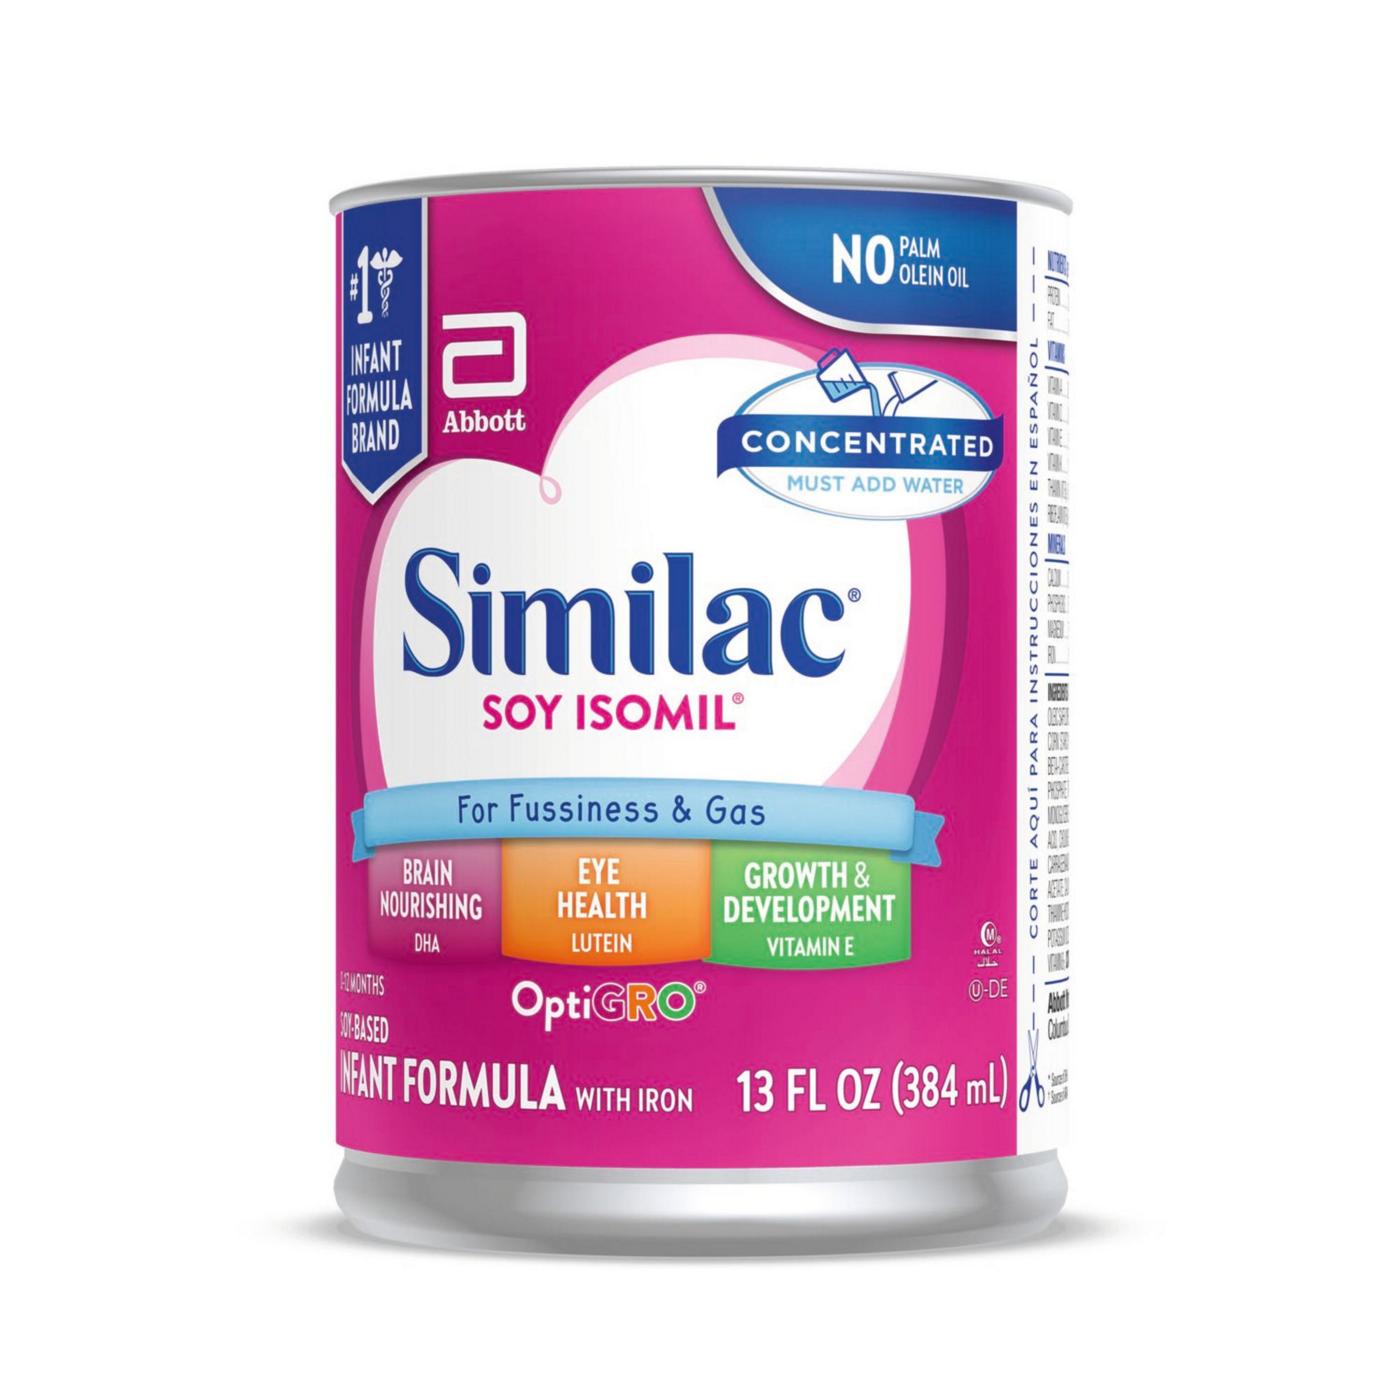 Similac Soy Isomil For Fussiness and Gas Infant Formula with Iron Concentrated Liquid; image 2 of 4